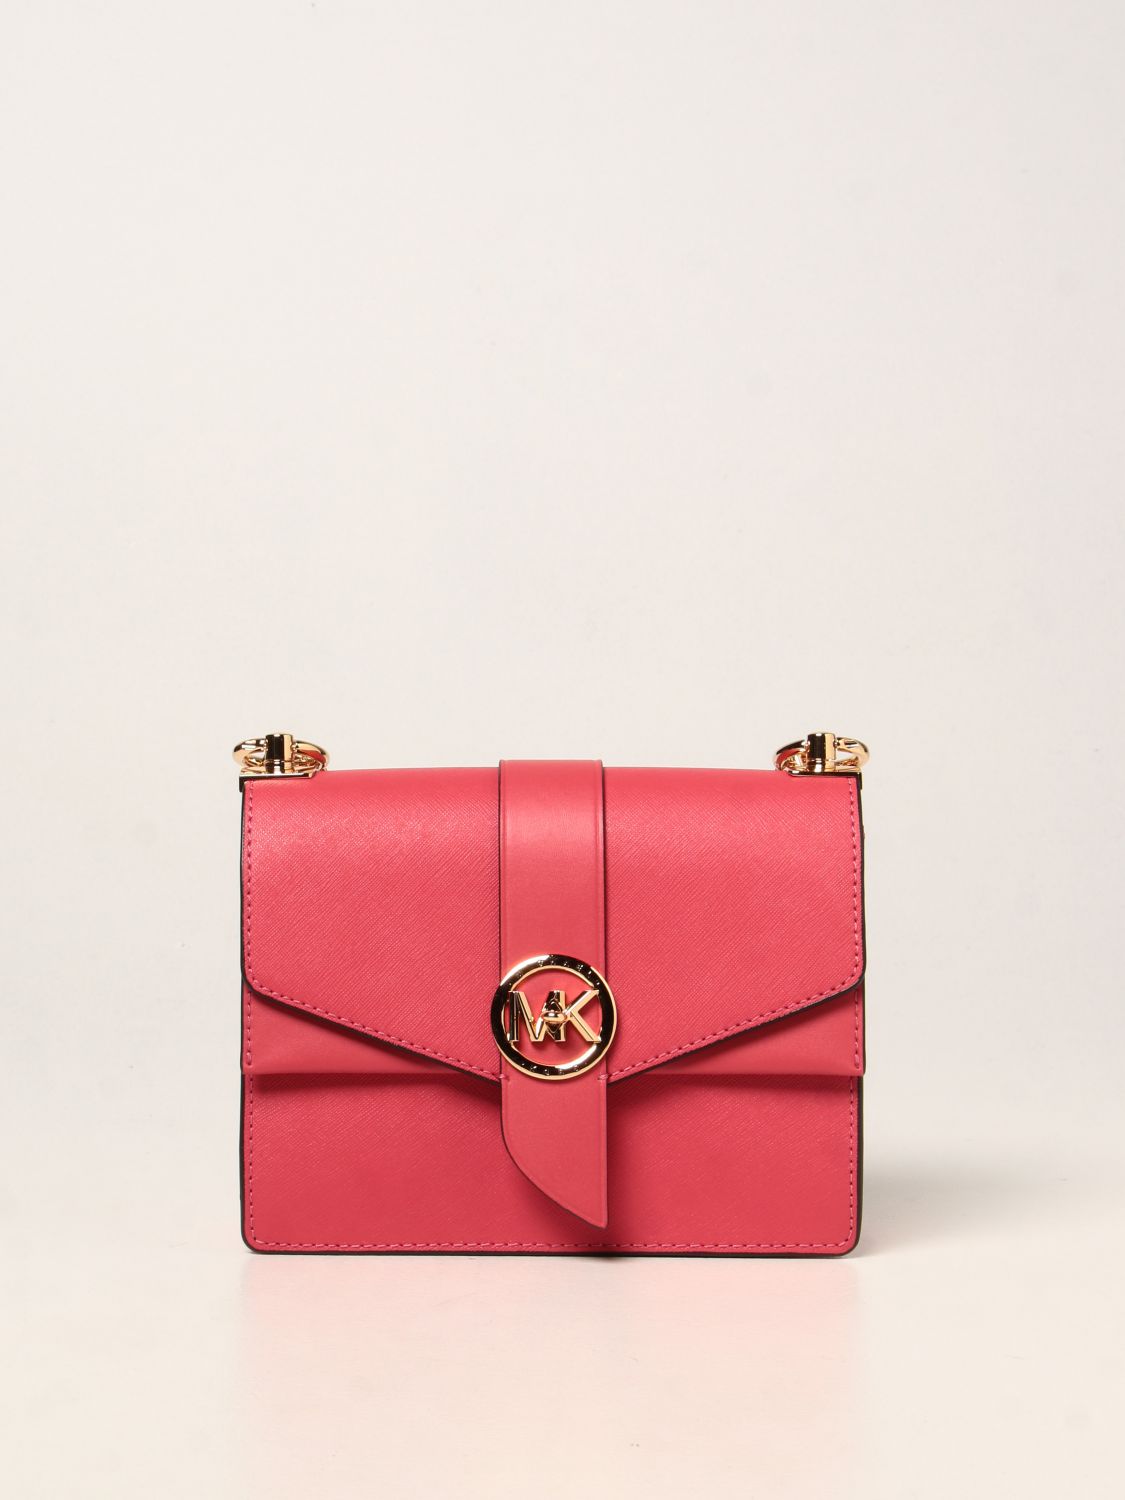 MICHAEL KORS: Greenwich Michael bag in saffiano leather